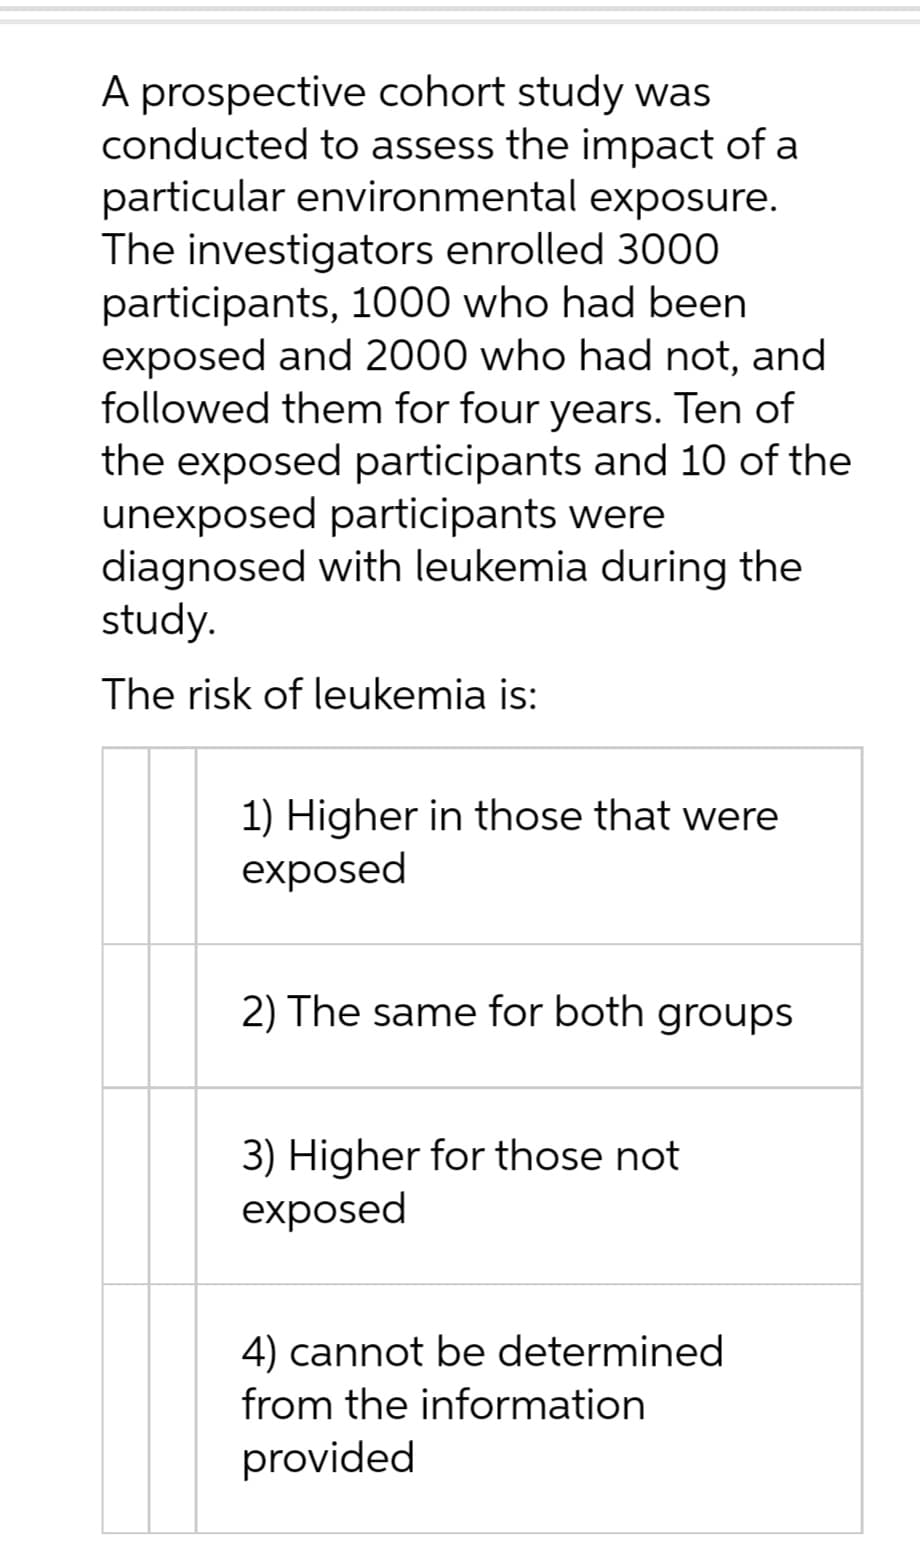 A prospective cohort study was
conducted to assess the impact of a
particular environmental exposure.
The investigators enrolled 3000
participants, 1000 who had been
exposed and 2000 who had not, and
followed them for four years. Ten of
the exposed participants and 10 of the
unexposed participants were
diagnosed with leukemia during the
study.
The risk of leukemia is:
1) Higher in those that were
exposed
2) The same for both groups
3) Higher for those not
exposed
4) cannot be determined
from the information
provided